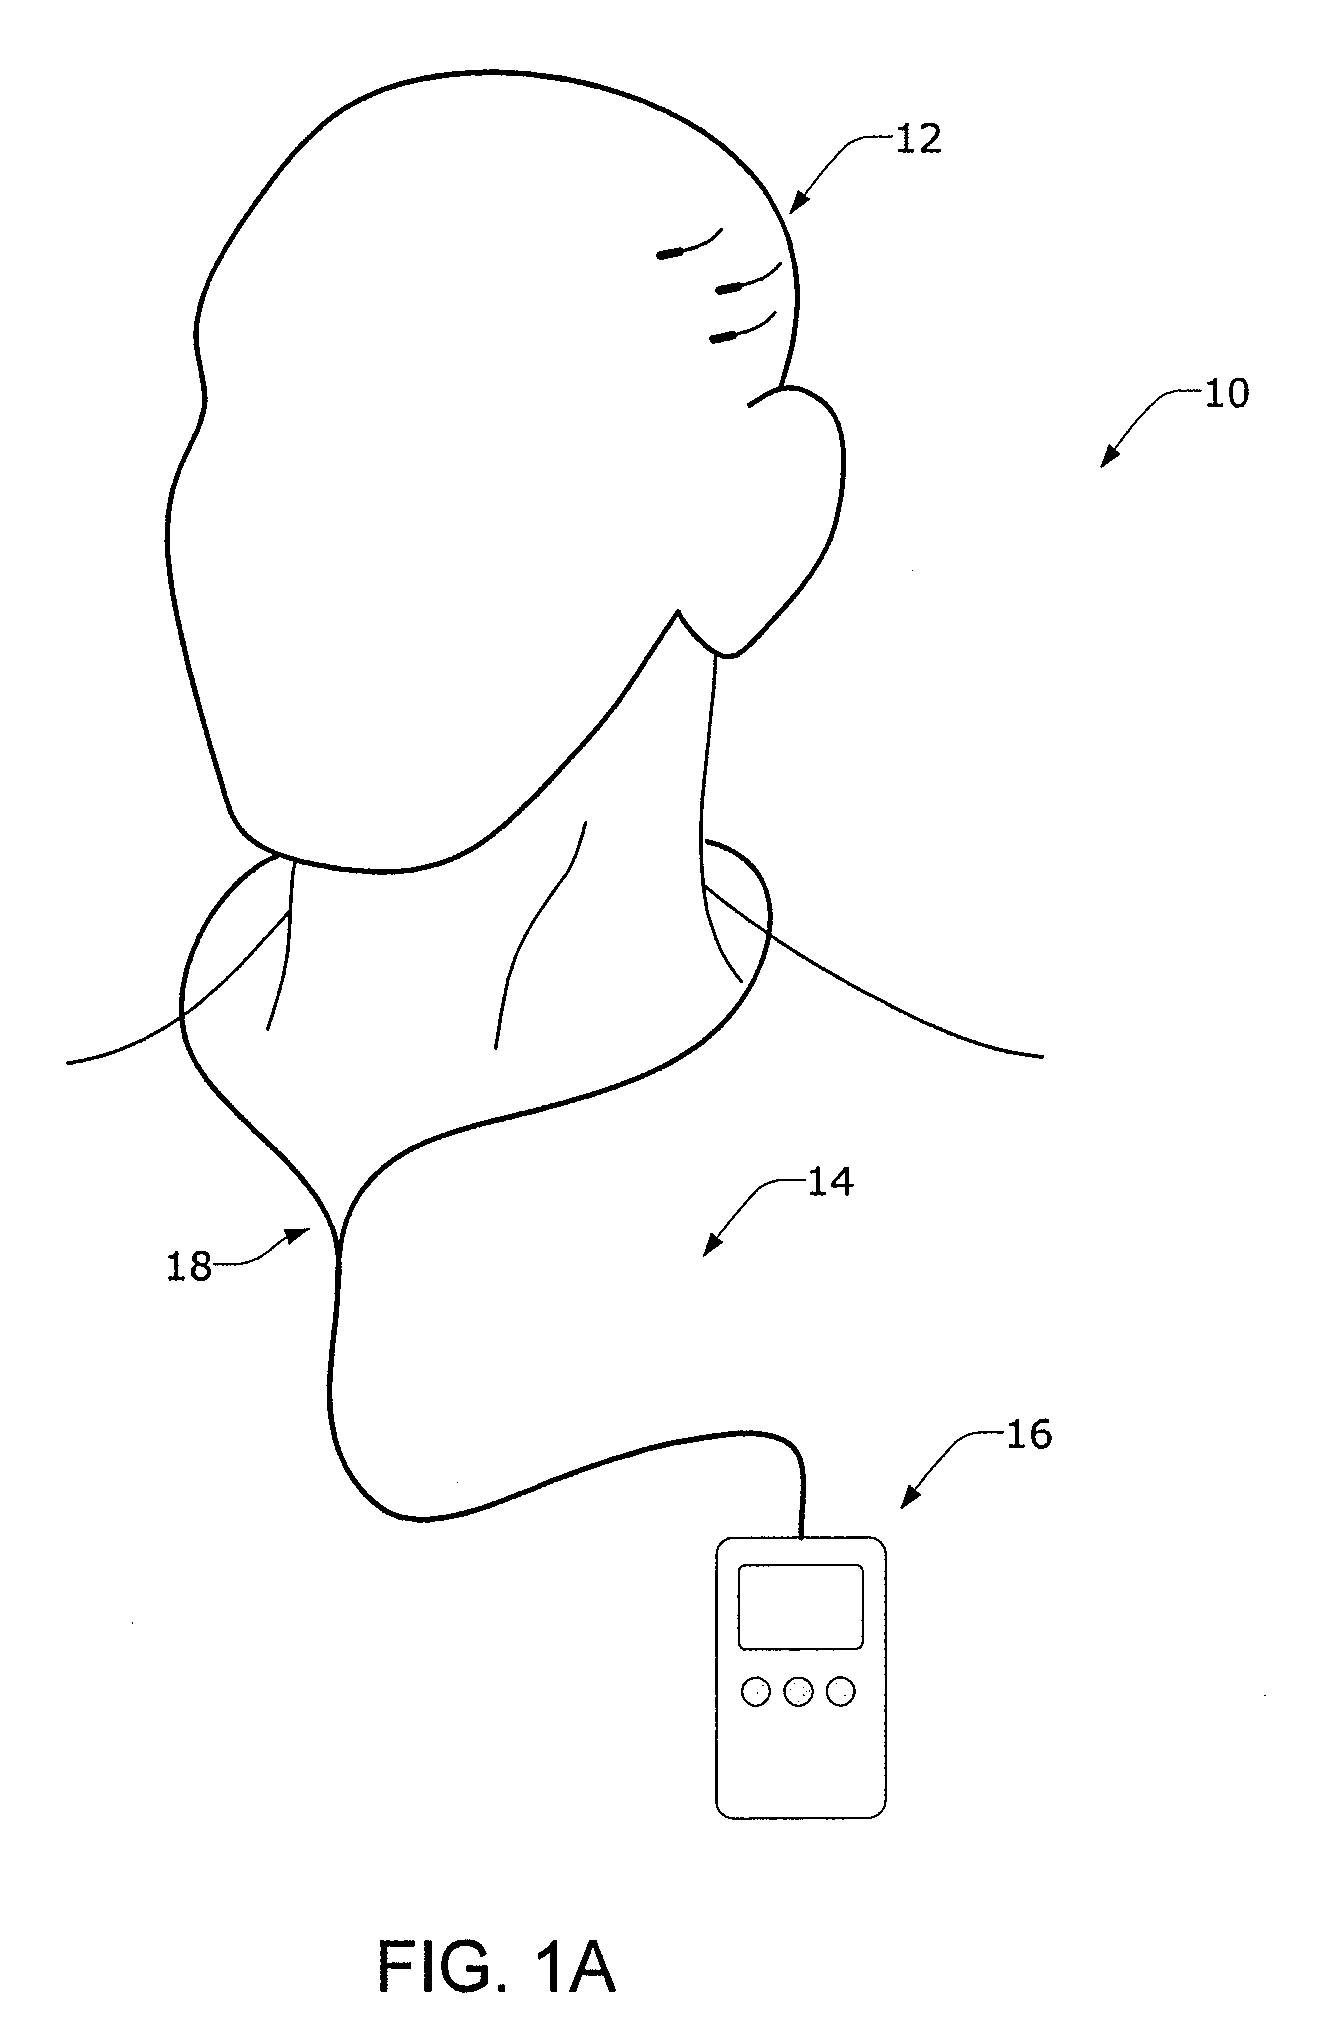 Minimally Invasive Monitoring Systems for Monitoring a Patient's Propensity for a Neurological Event